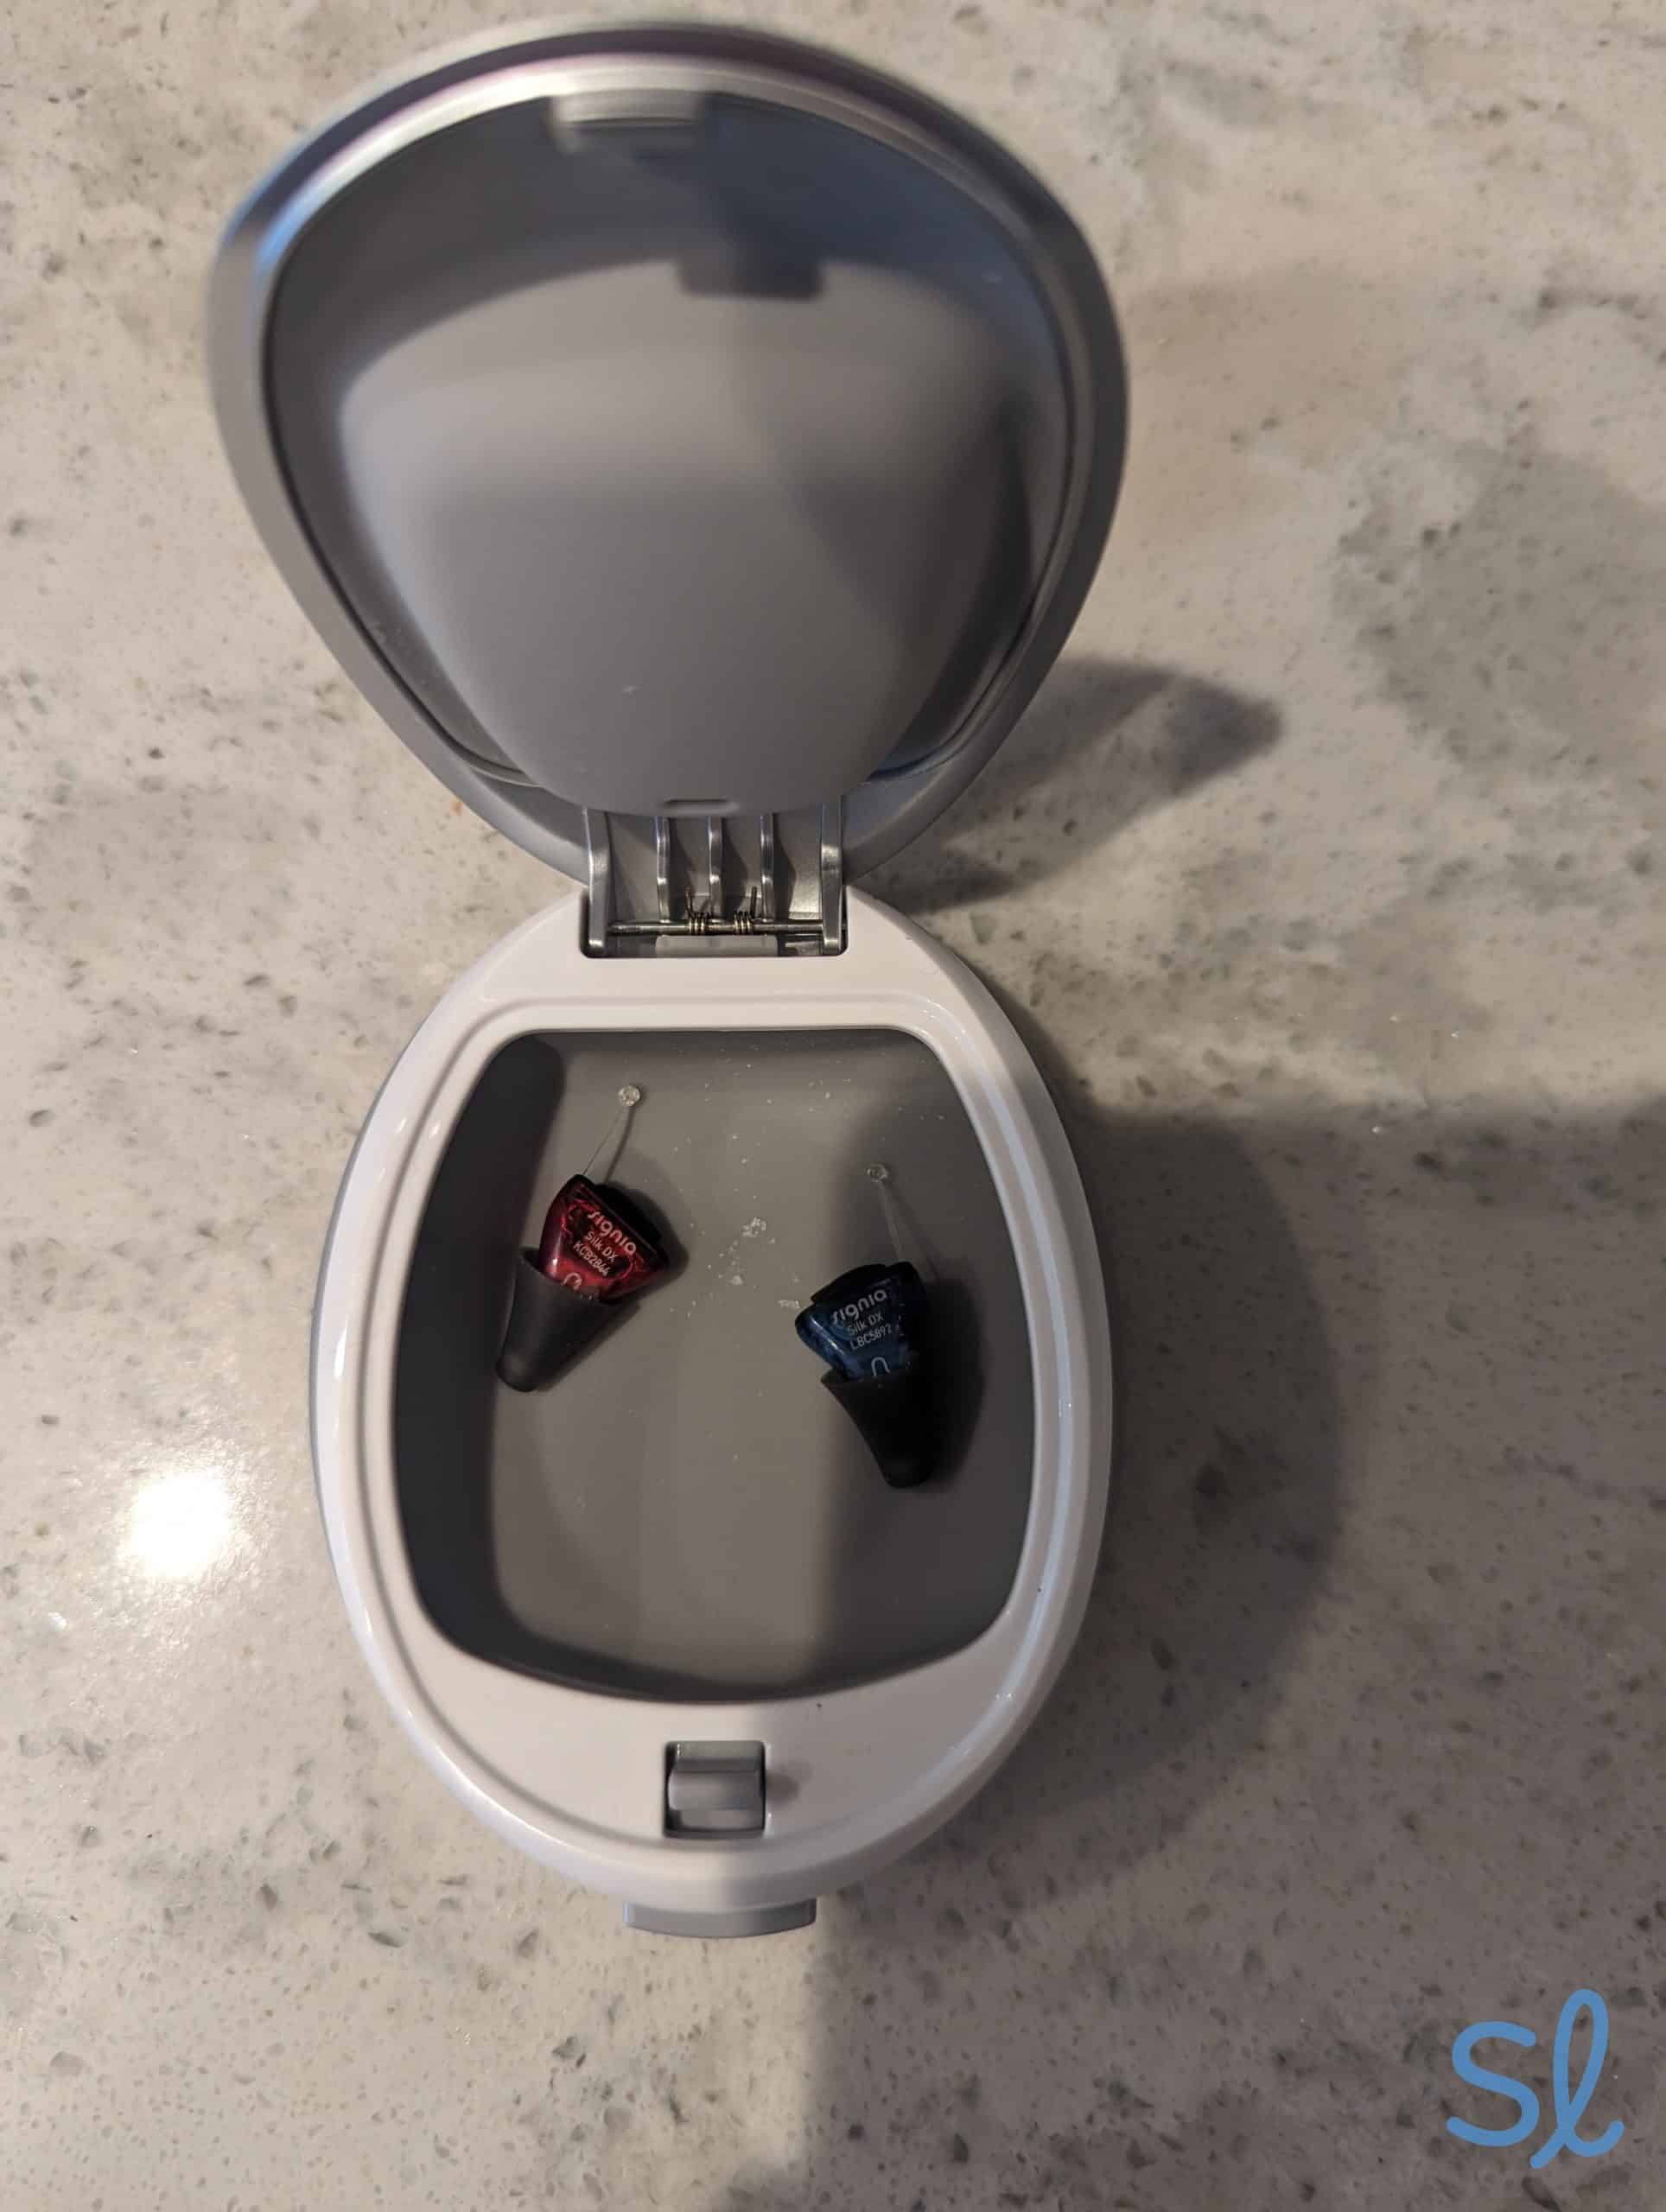 Trying out Signia's Silk hearing aids 